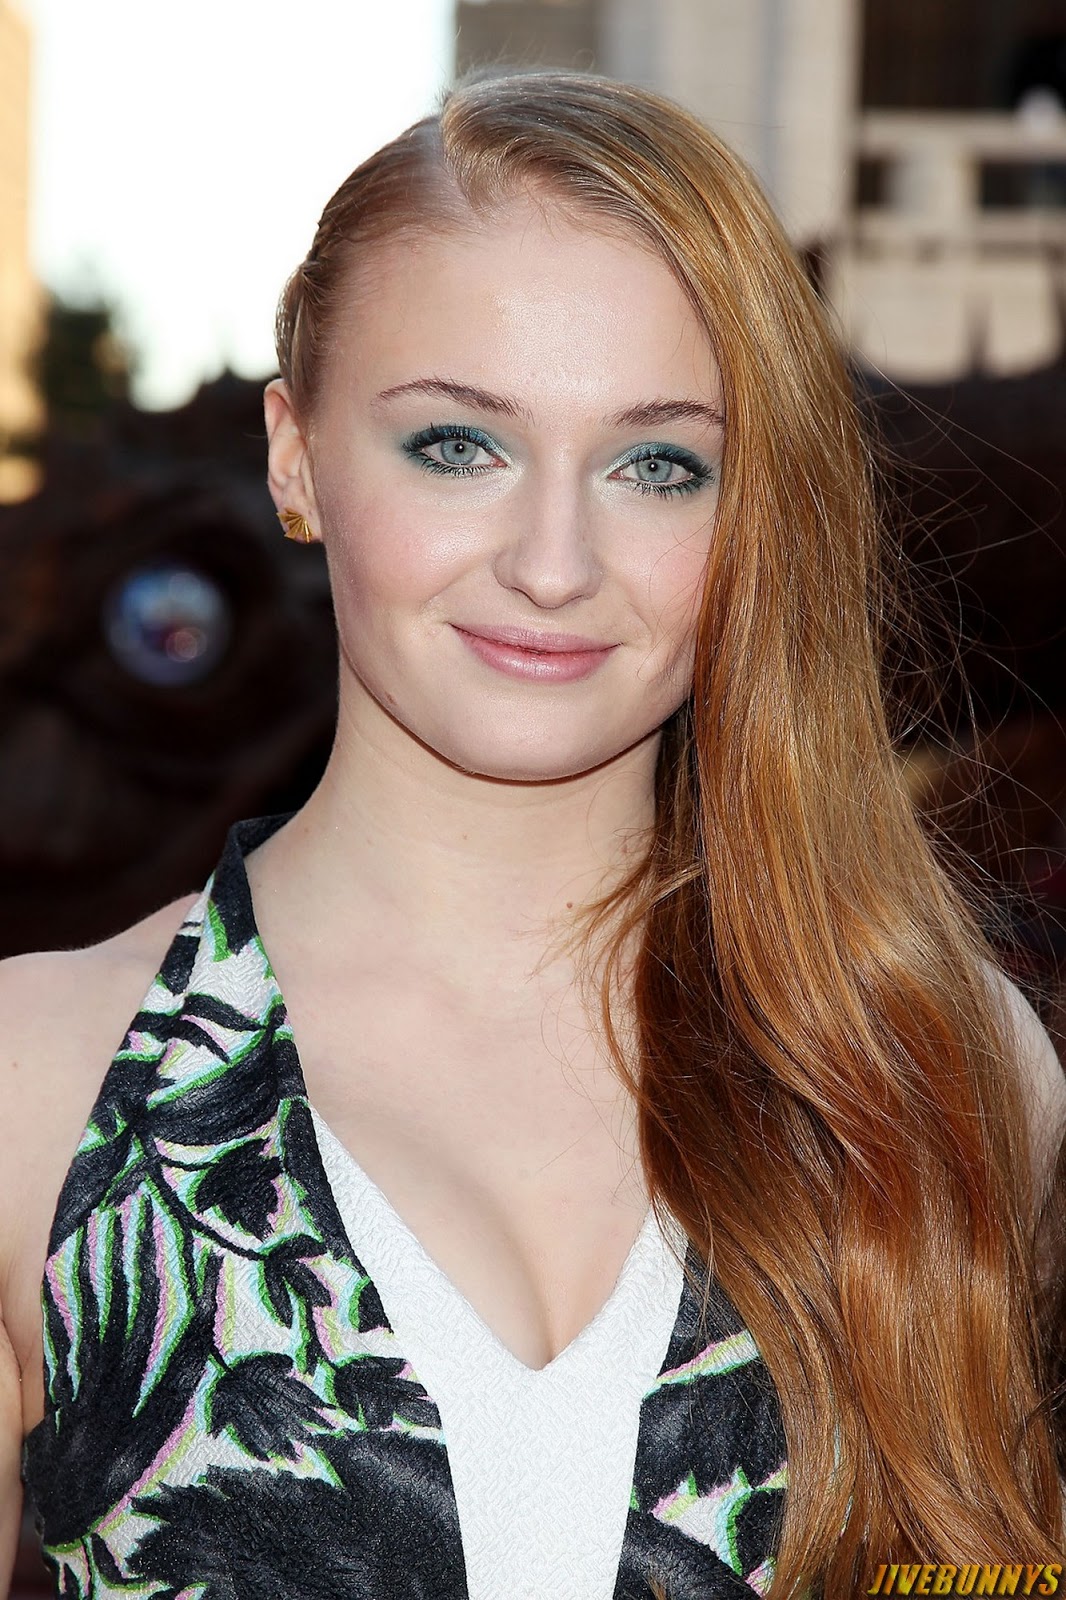 Sophie Turner Actress Photos and Picture Gallery 11066 x 1600